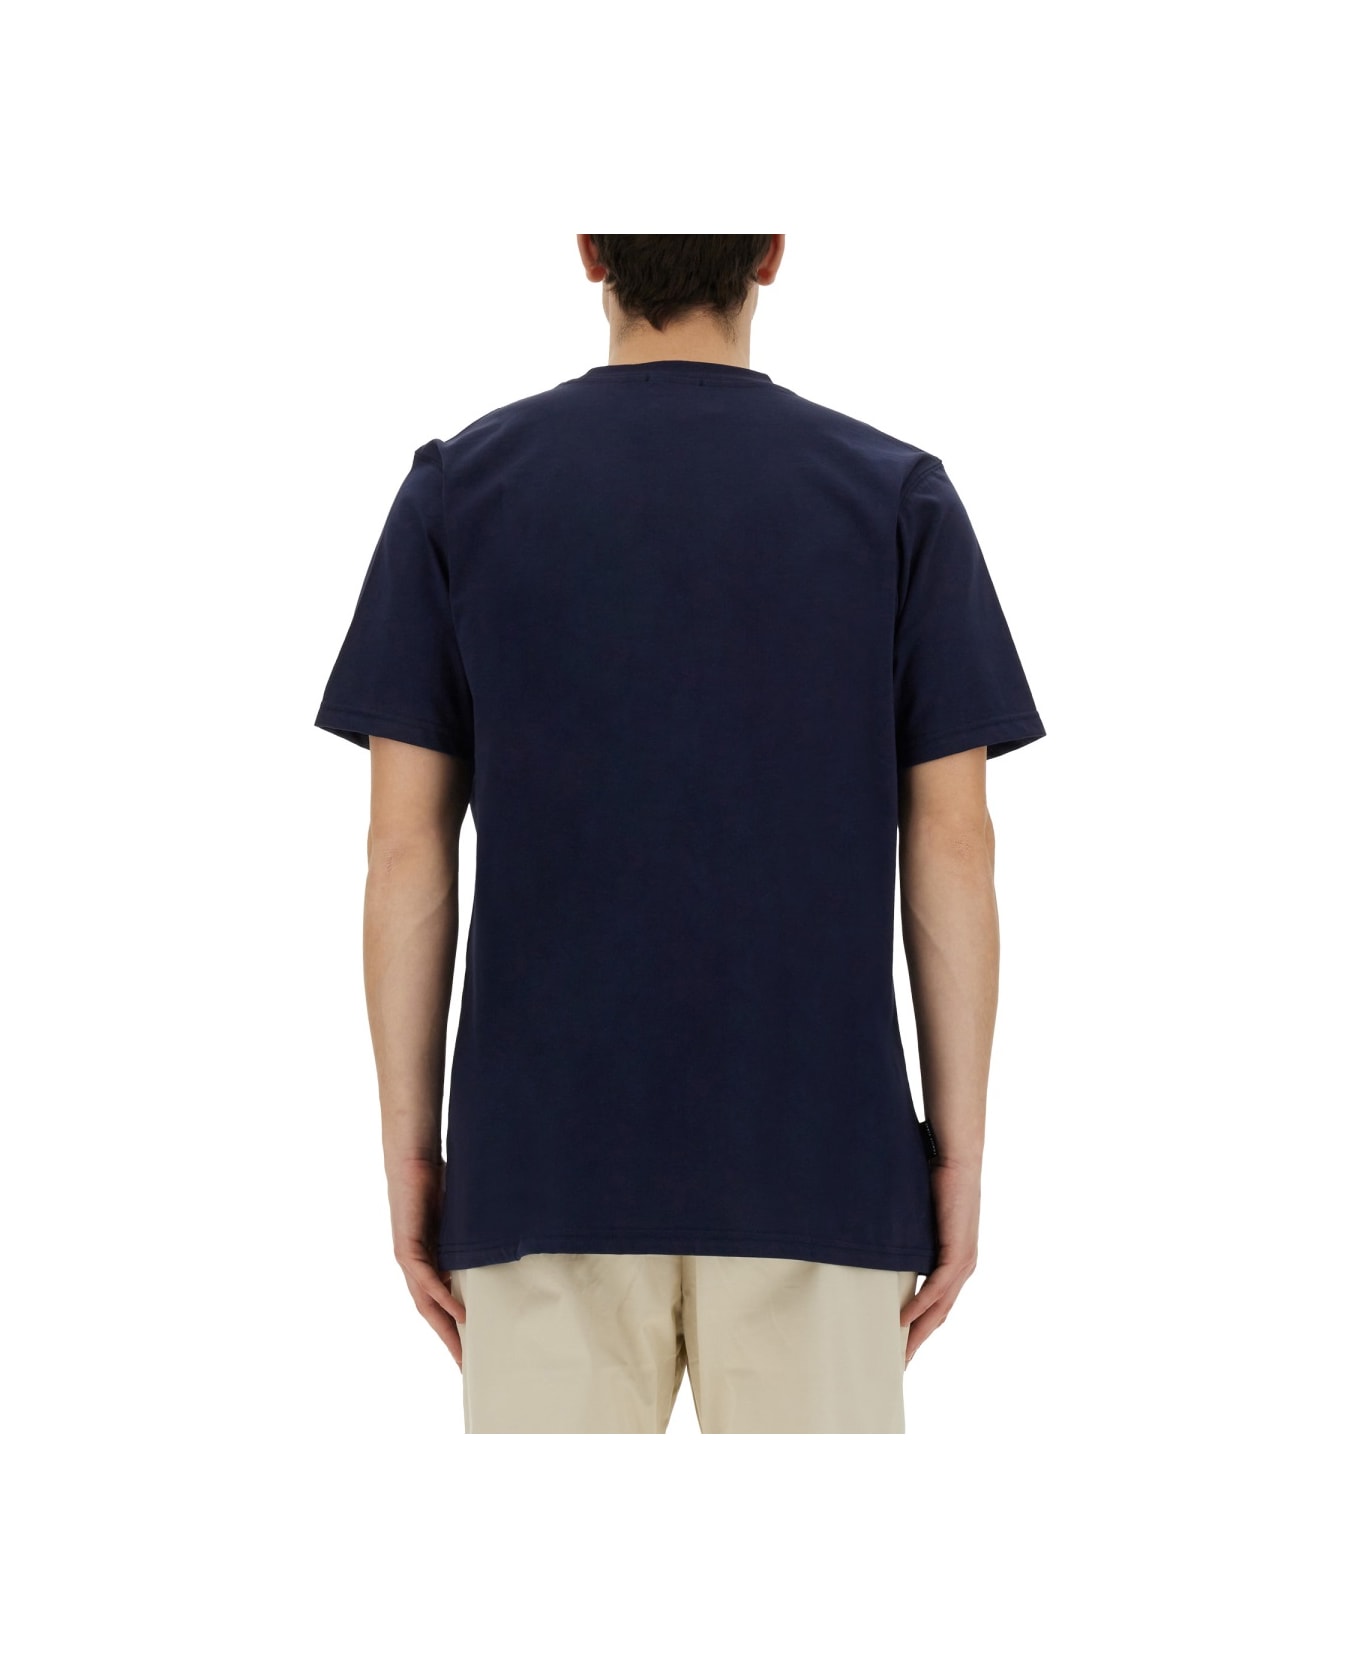 Family First Milano T-shirt With "caviar" Print - BLUE シャツ